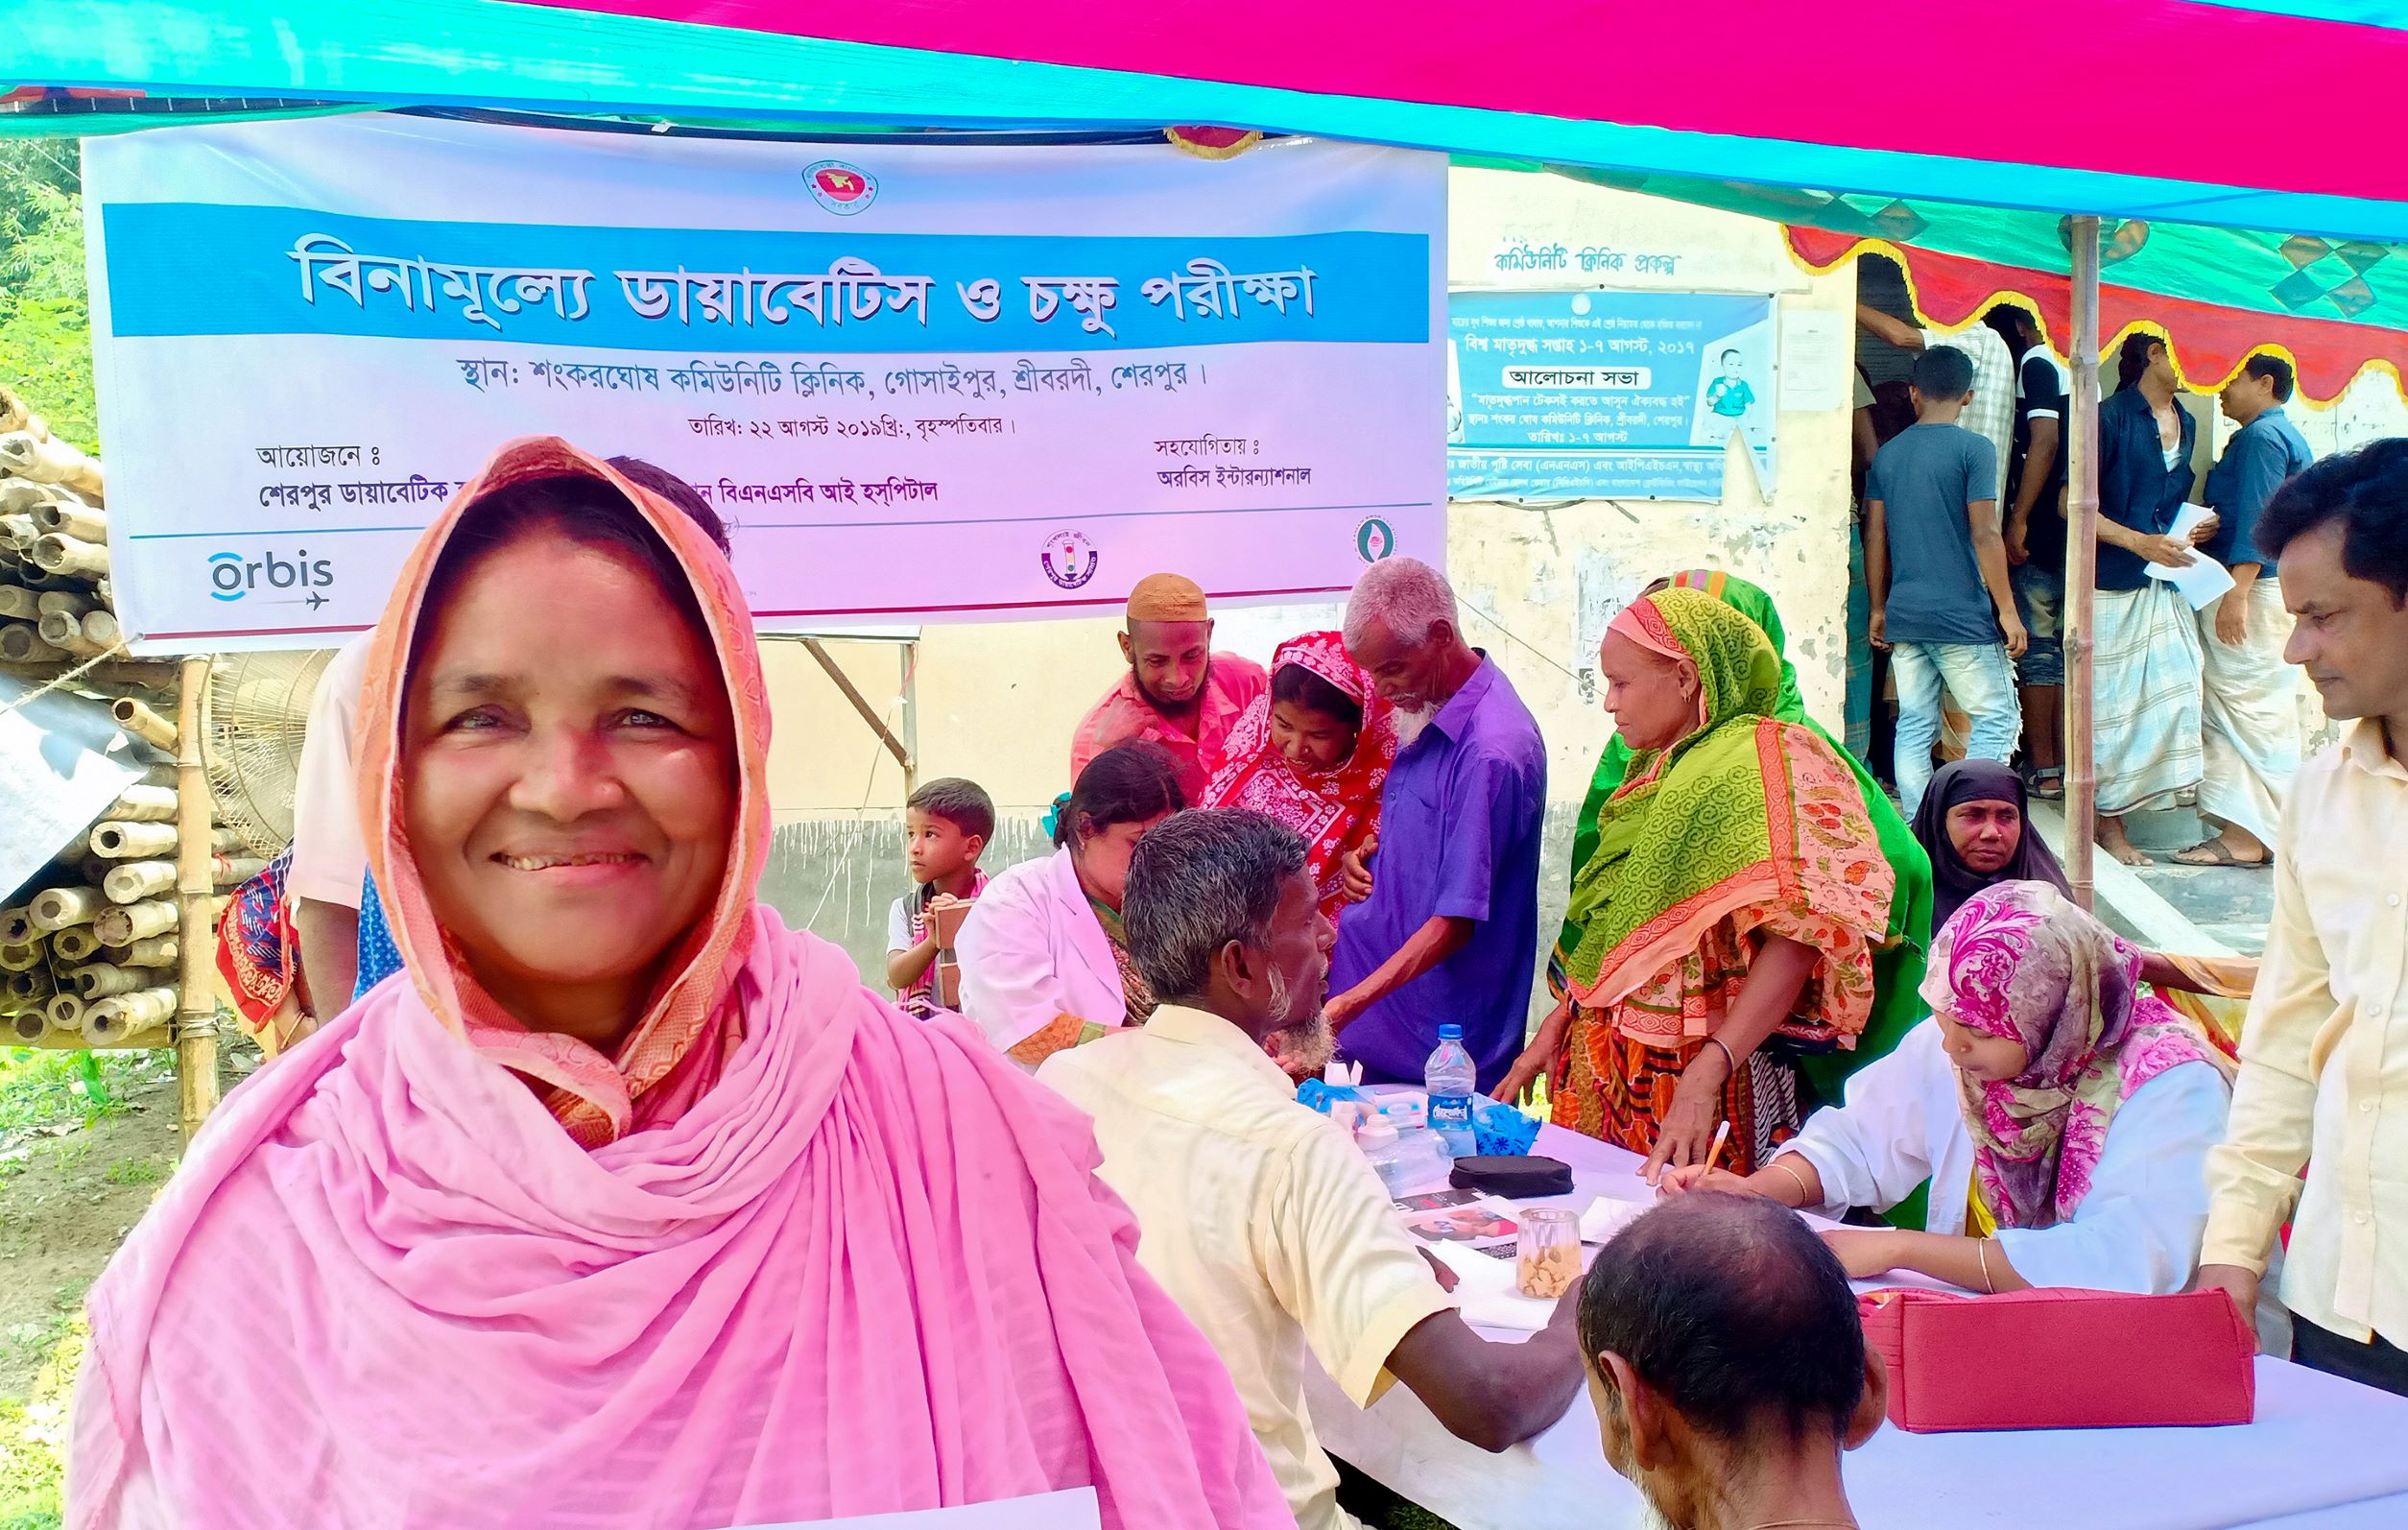 Digital Diagnostics and Orbis International announce study to help save sight in Bangladesh